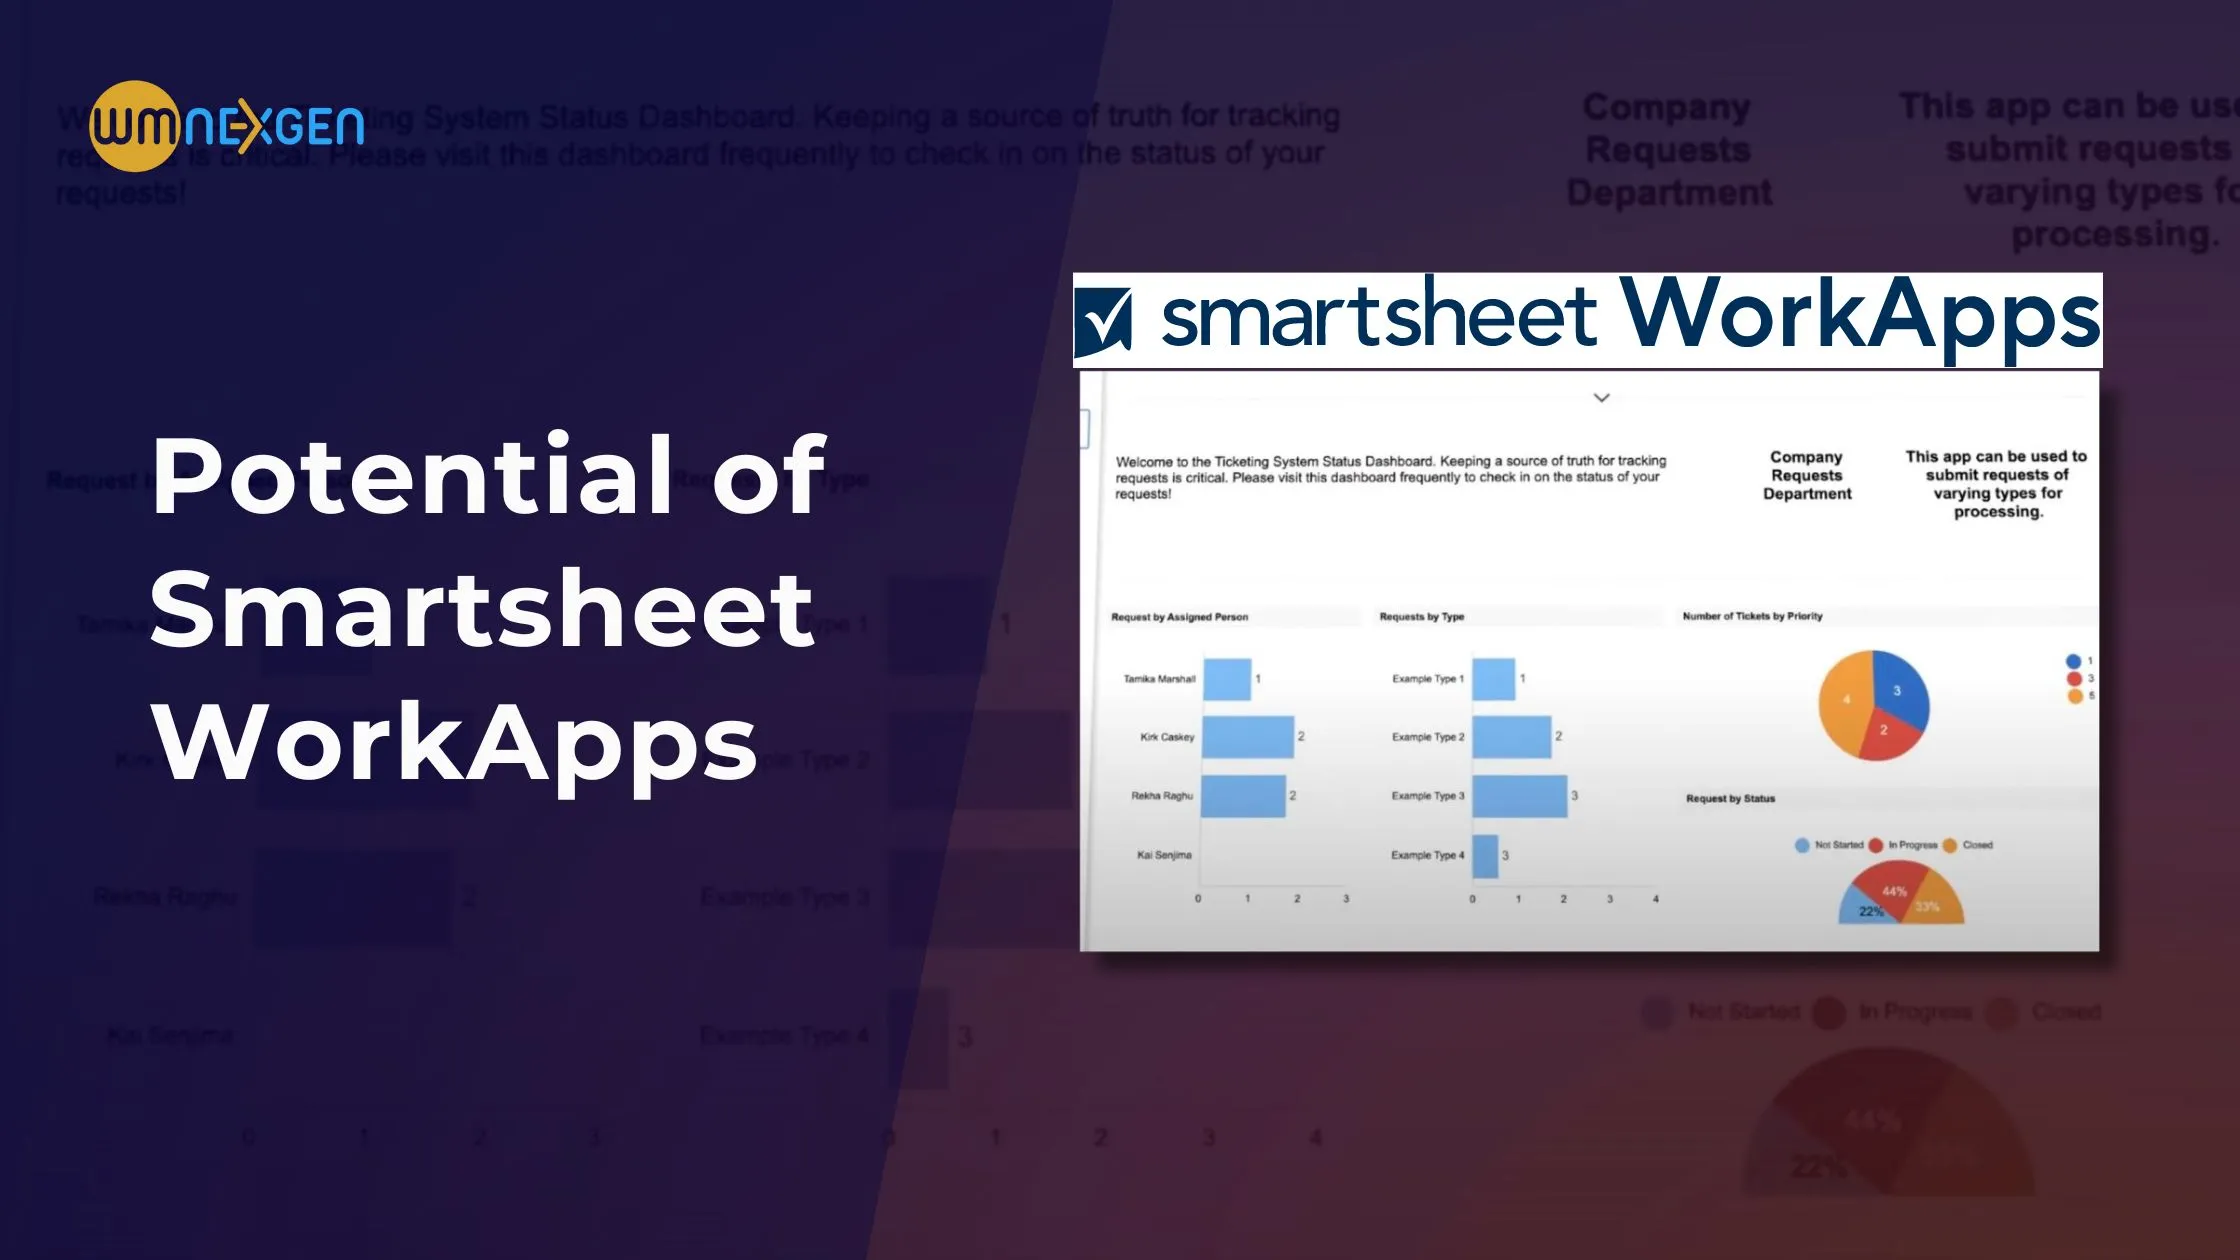 Know the potential of smartsheet workapps